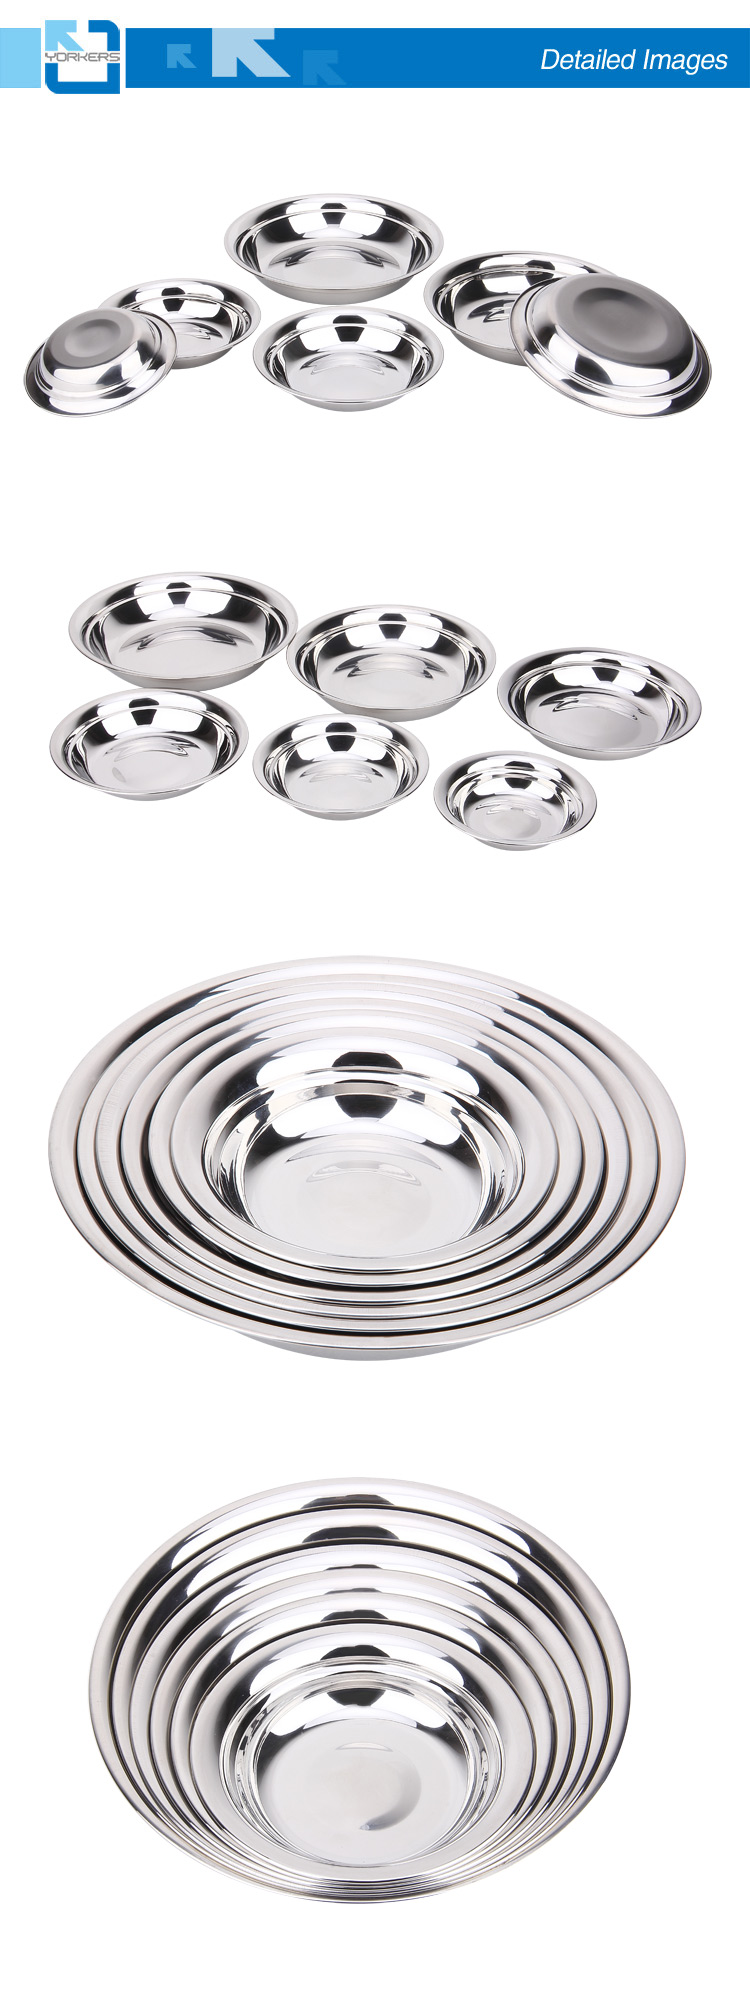 Mulit-Size Stainless Steel Dinner Plate, Round Plate / No Spill Bowl